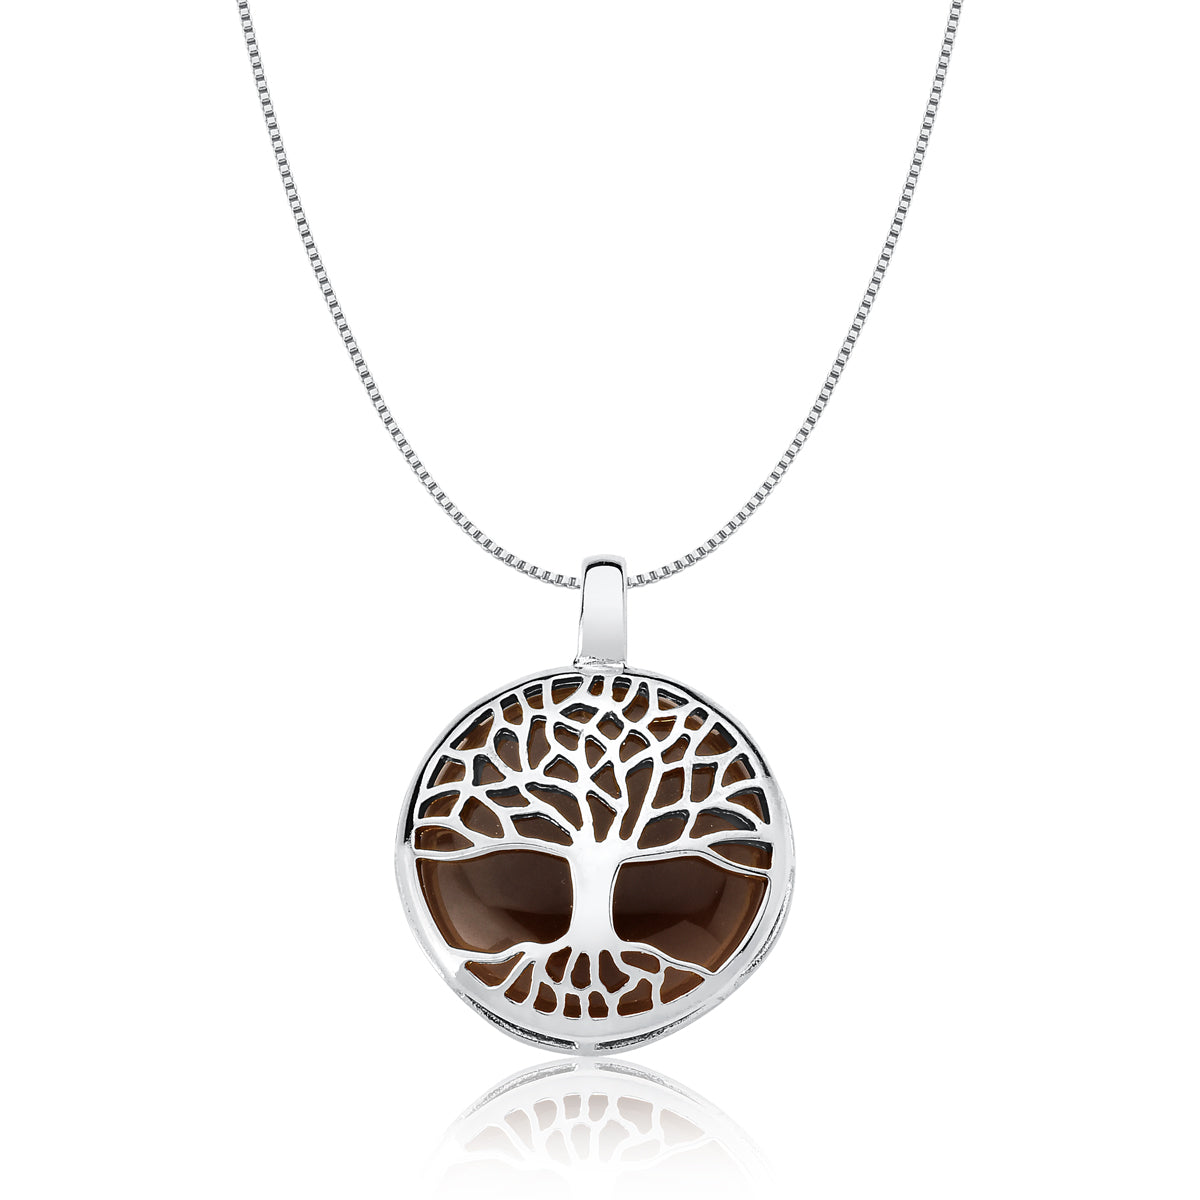 Tree of Life Pendant Necklace in Smoke Obsidian Natural Gemstone | Rhodium Plated